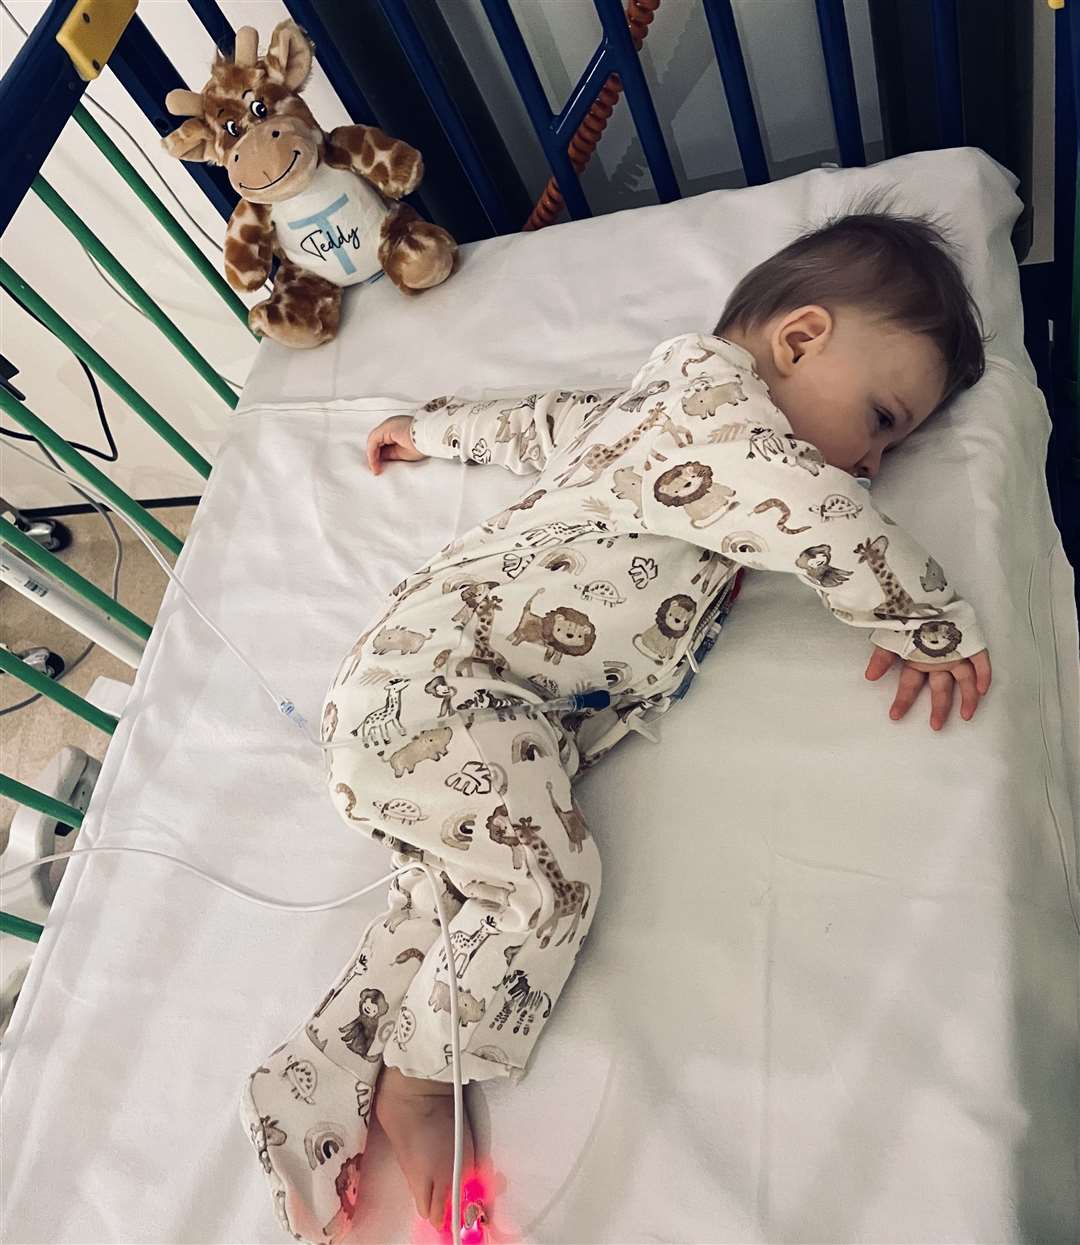 Teddy is undergoing treatment at Great Ormond Street Hospital for Children in London